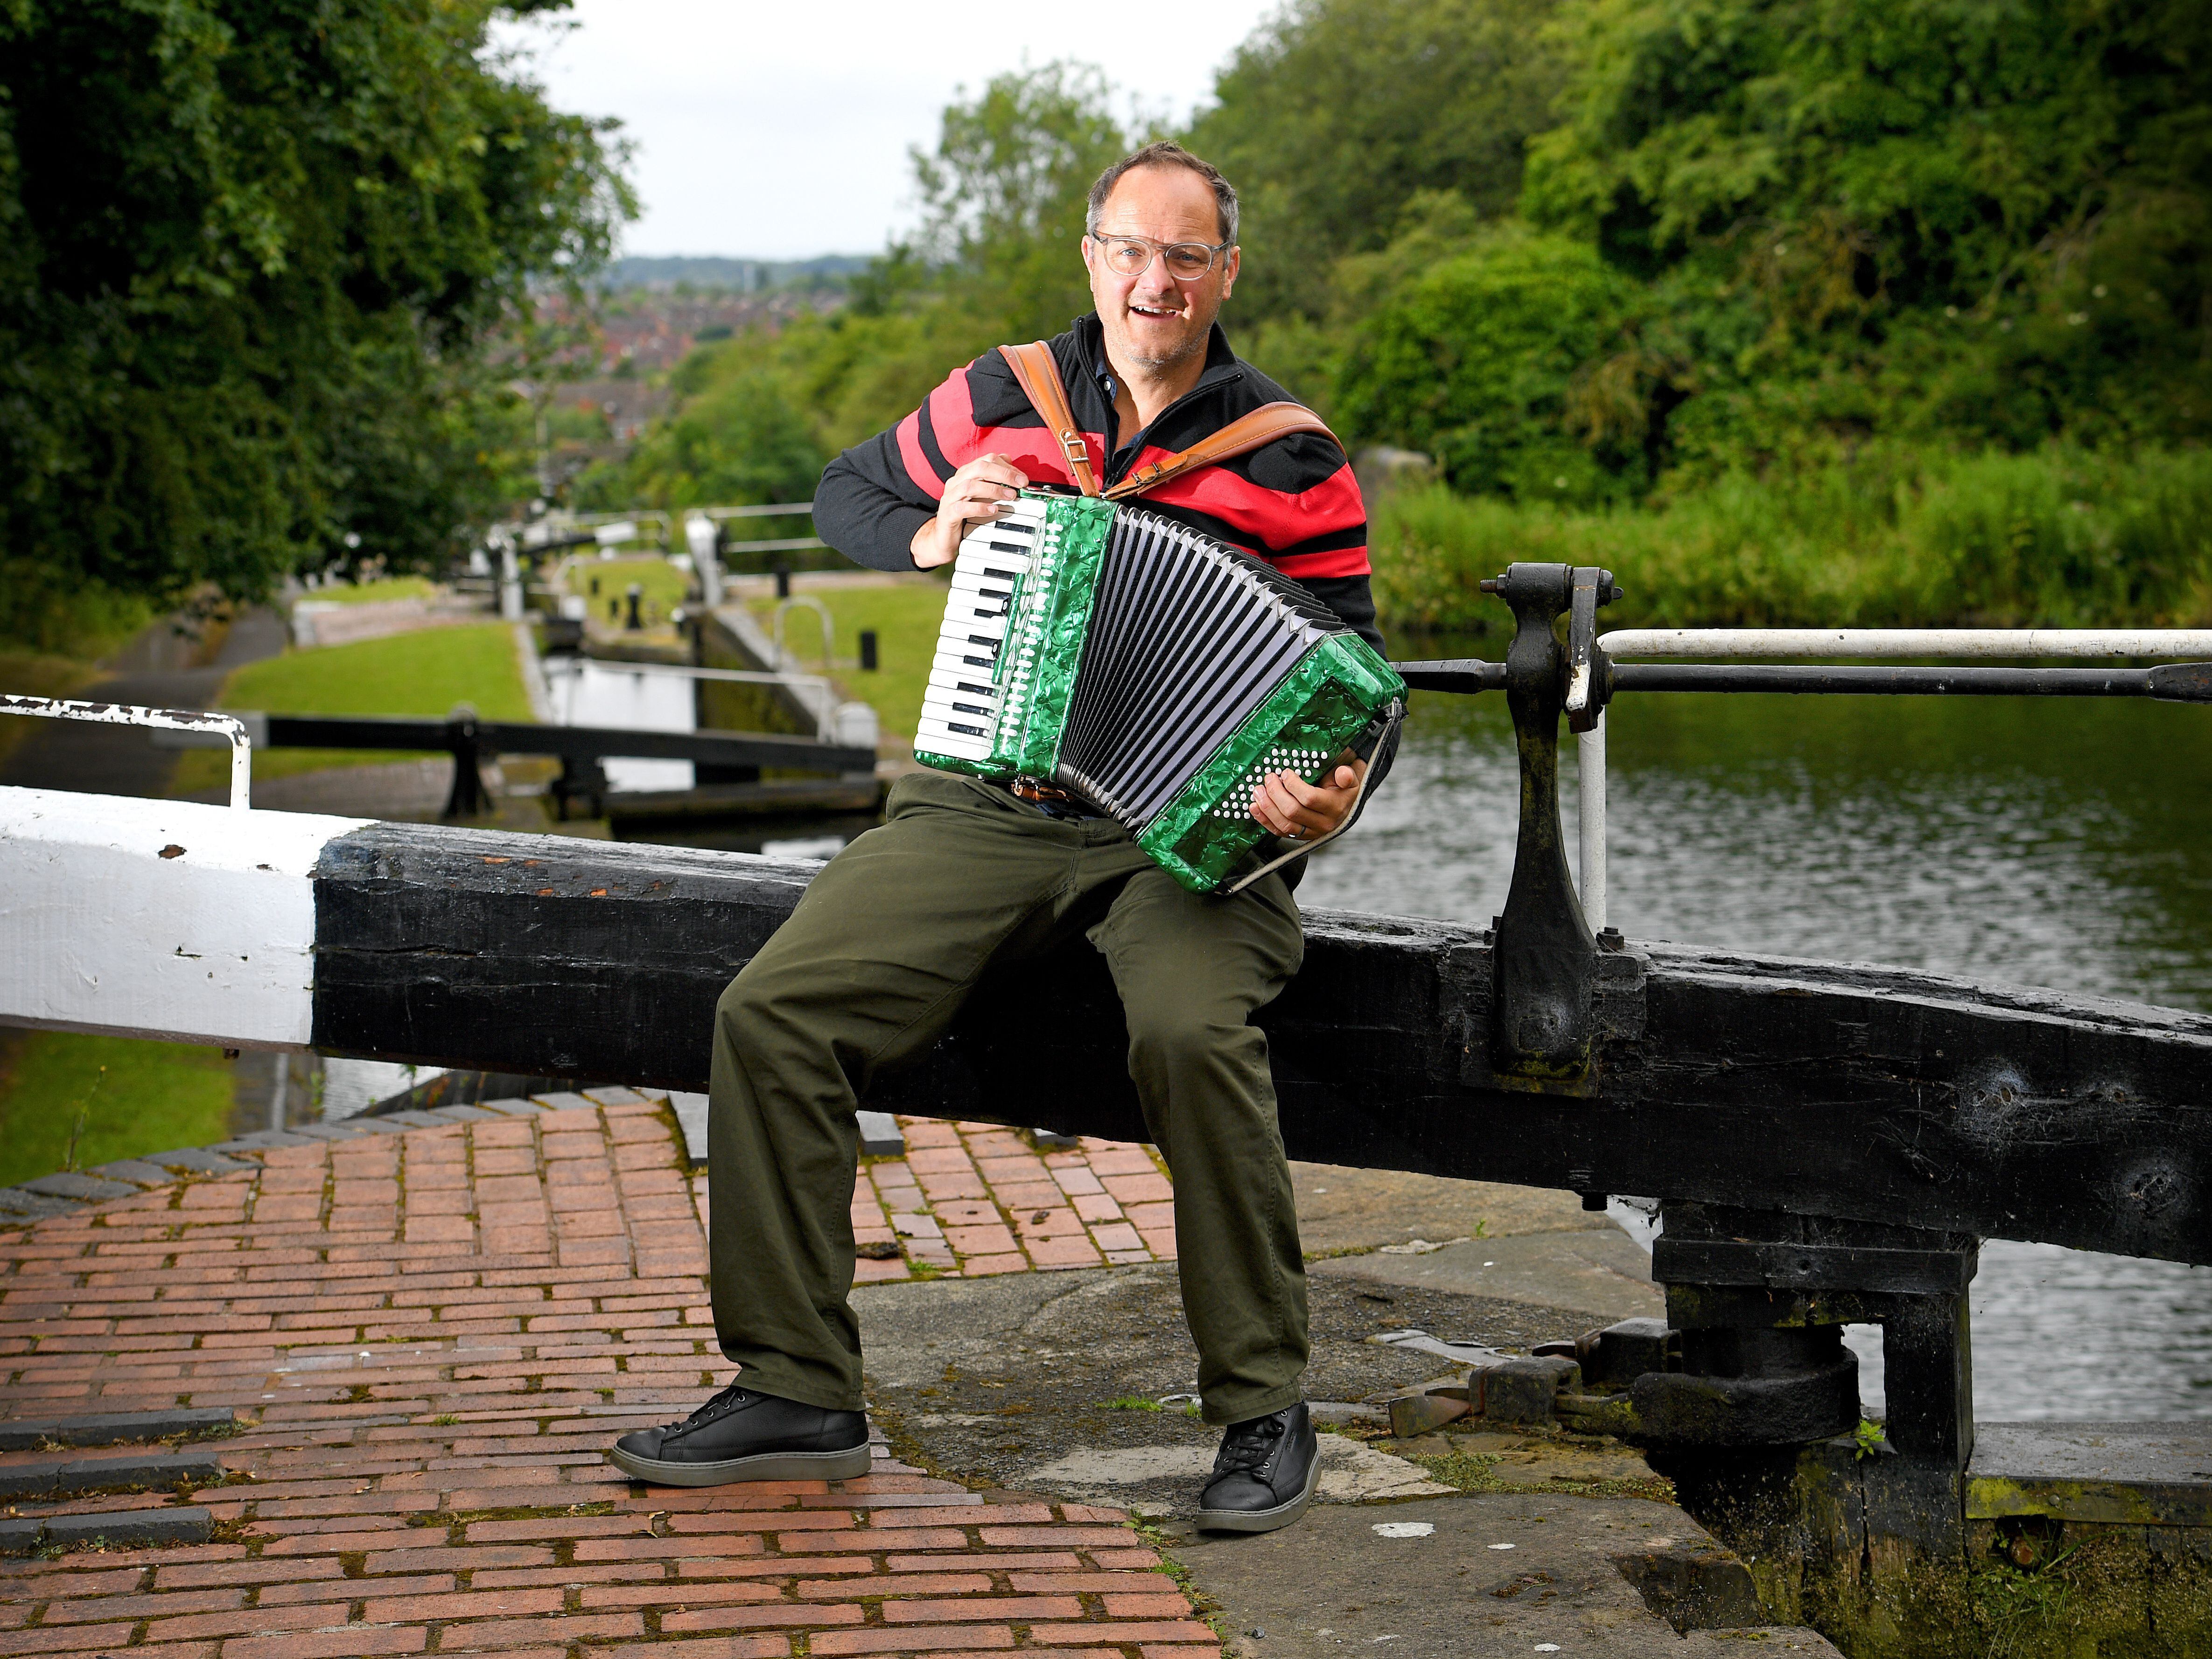 Day of singing and canal story-telling at Black Country locks – here's what to expect